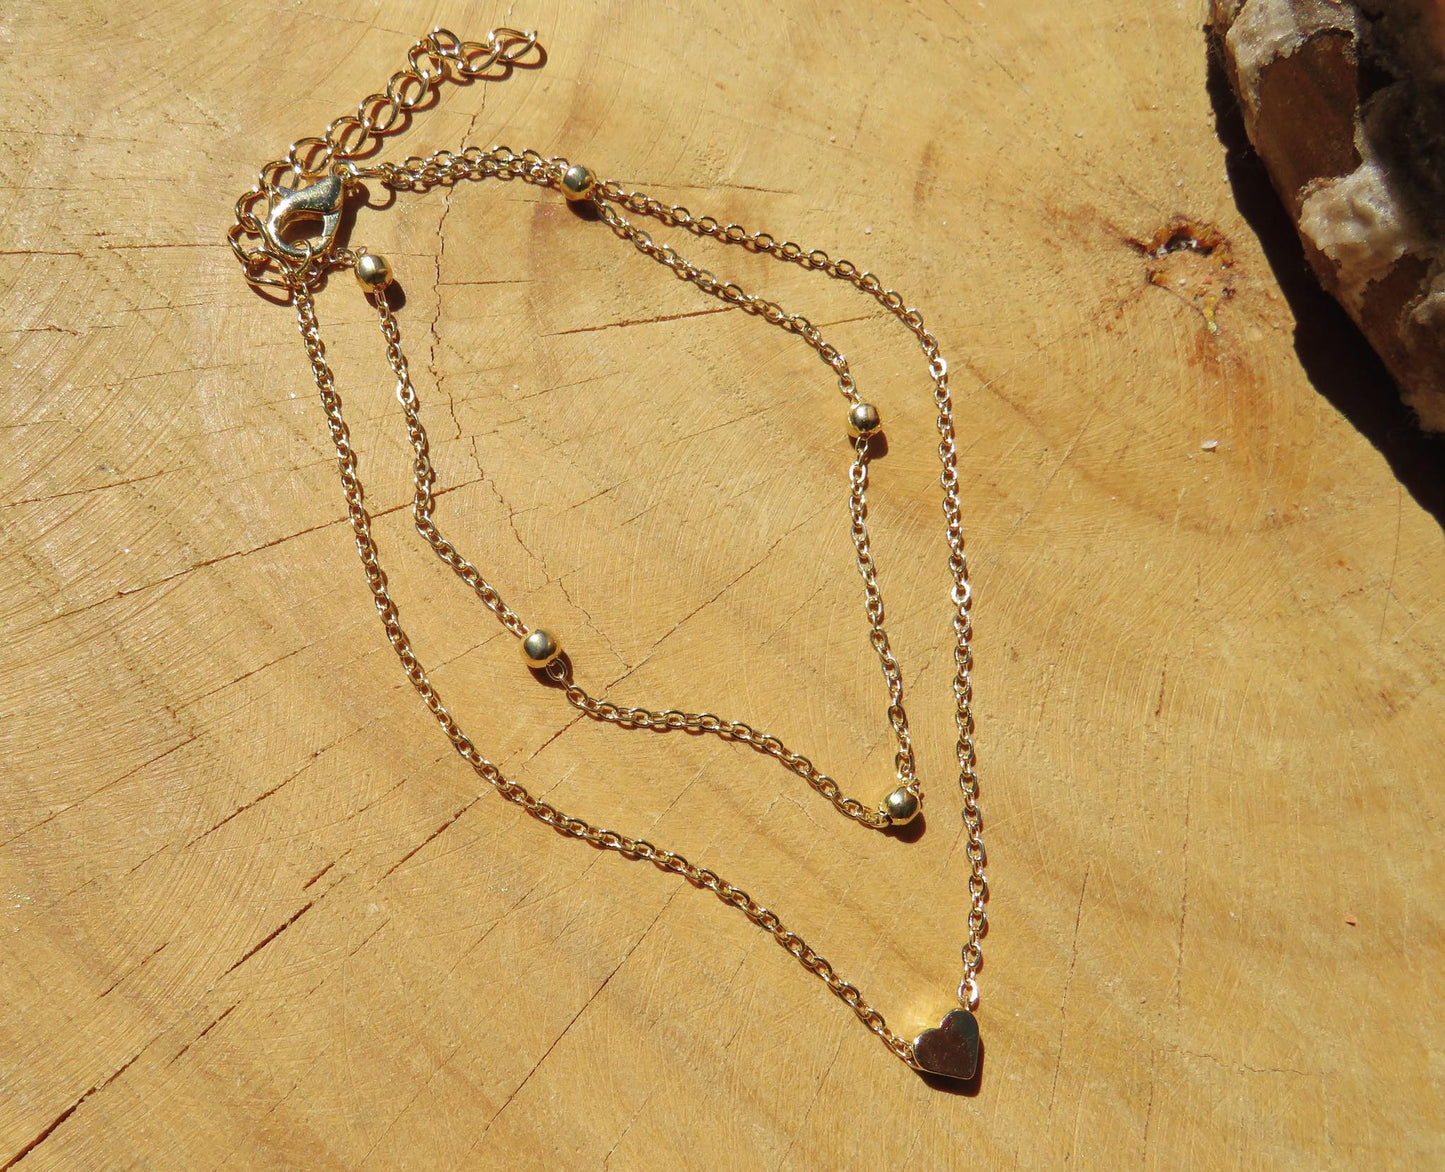 Double Chain Heart Anklet